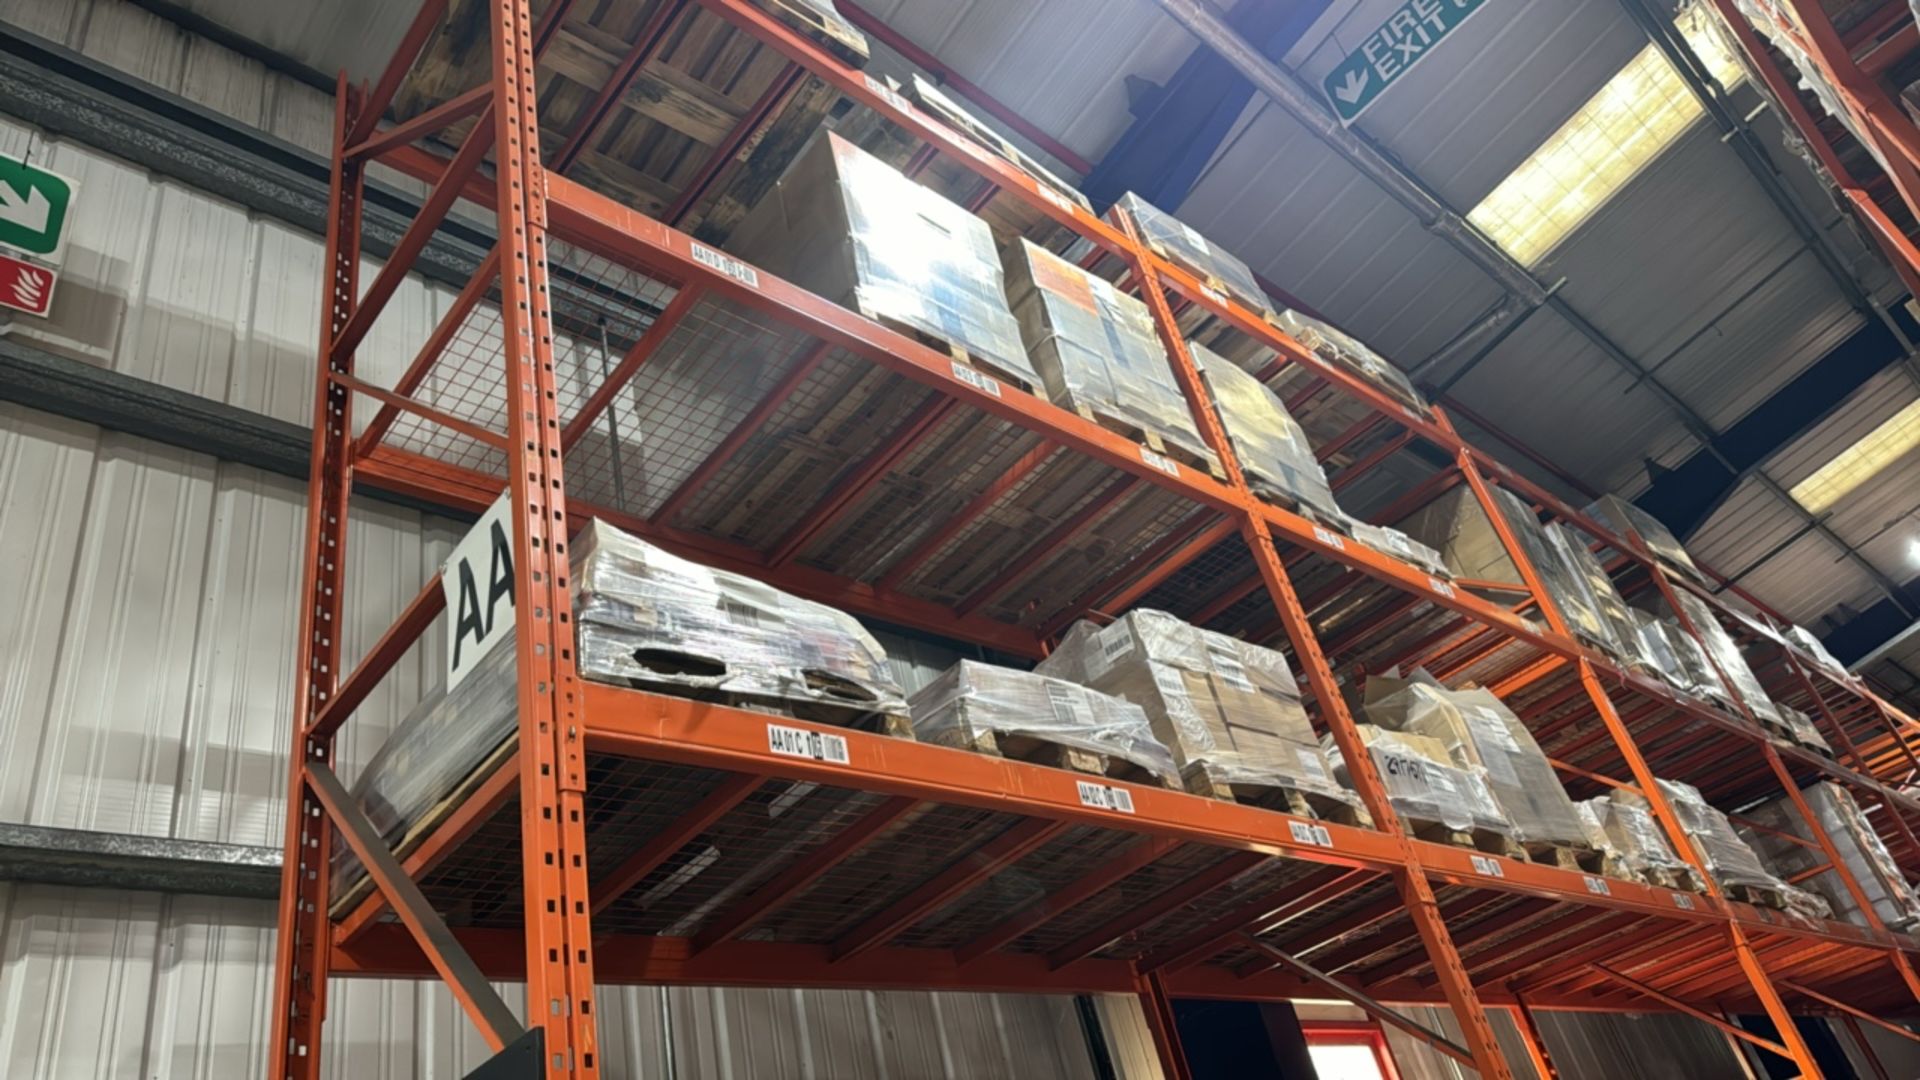 ref 9 - 23 Bays Of Boltless Pallet Racking - Image 6 of 10